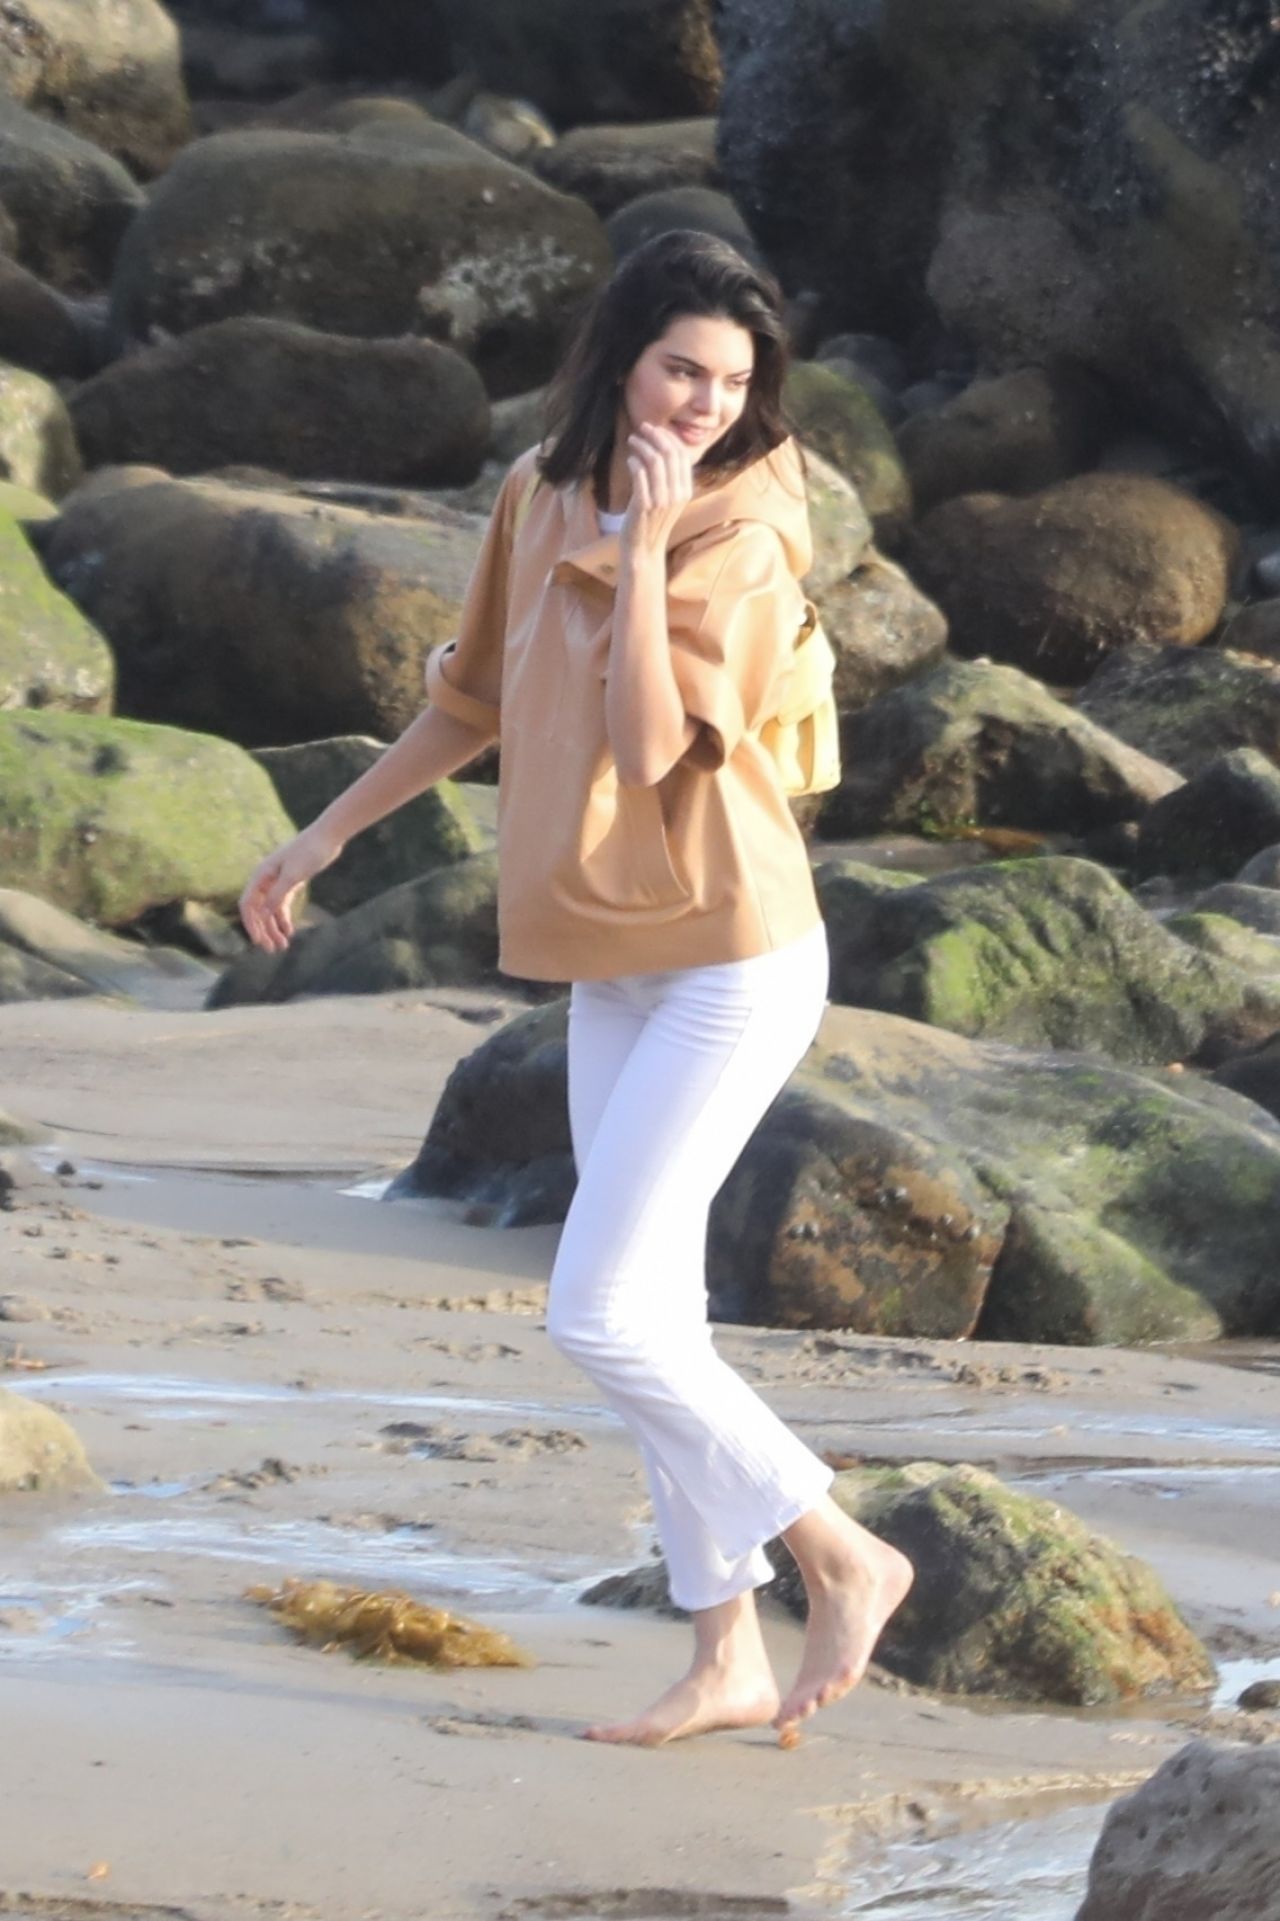 Kendall Jenner Candids - On the Set of a Photoshoot in Malibu 11